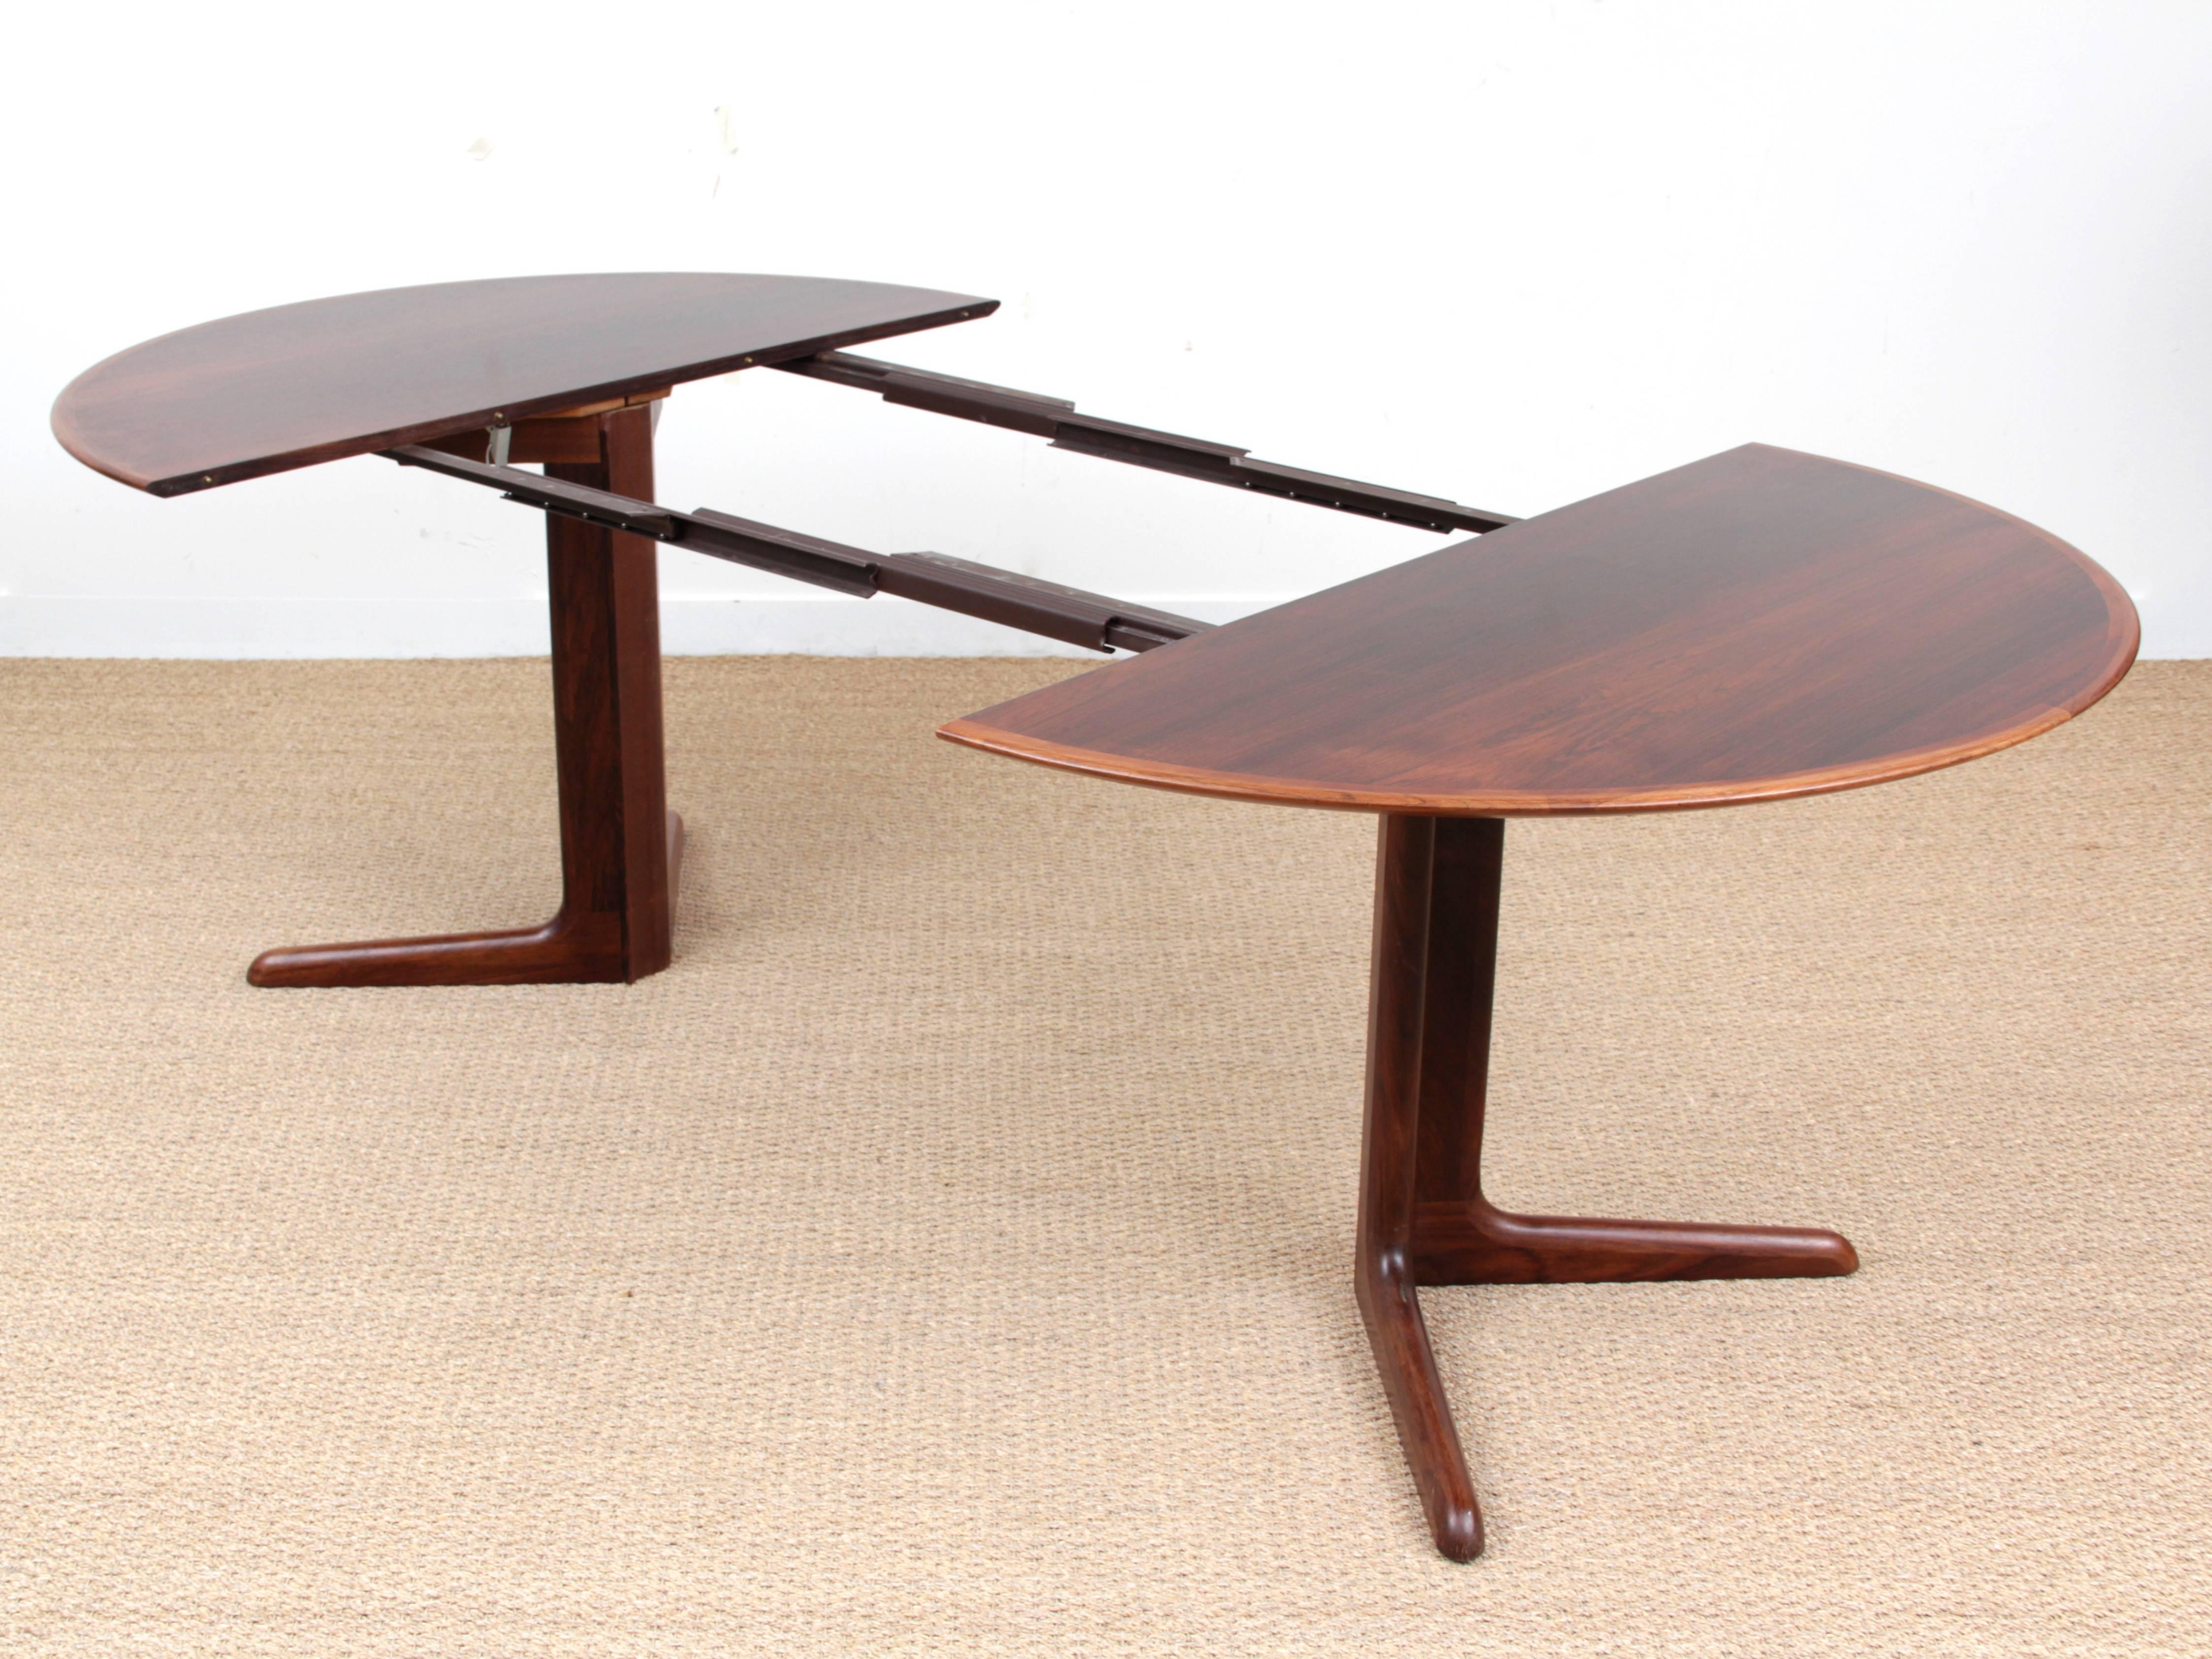 Late 20th Century Mid-Century Modern Scandinavian Round Dining Table in Rosewood